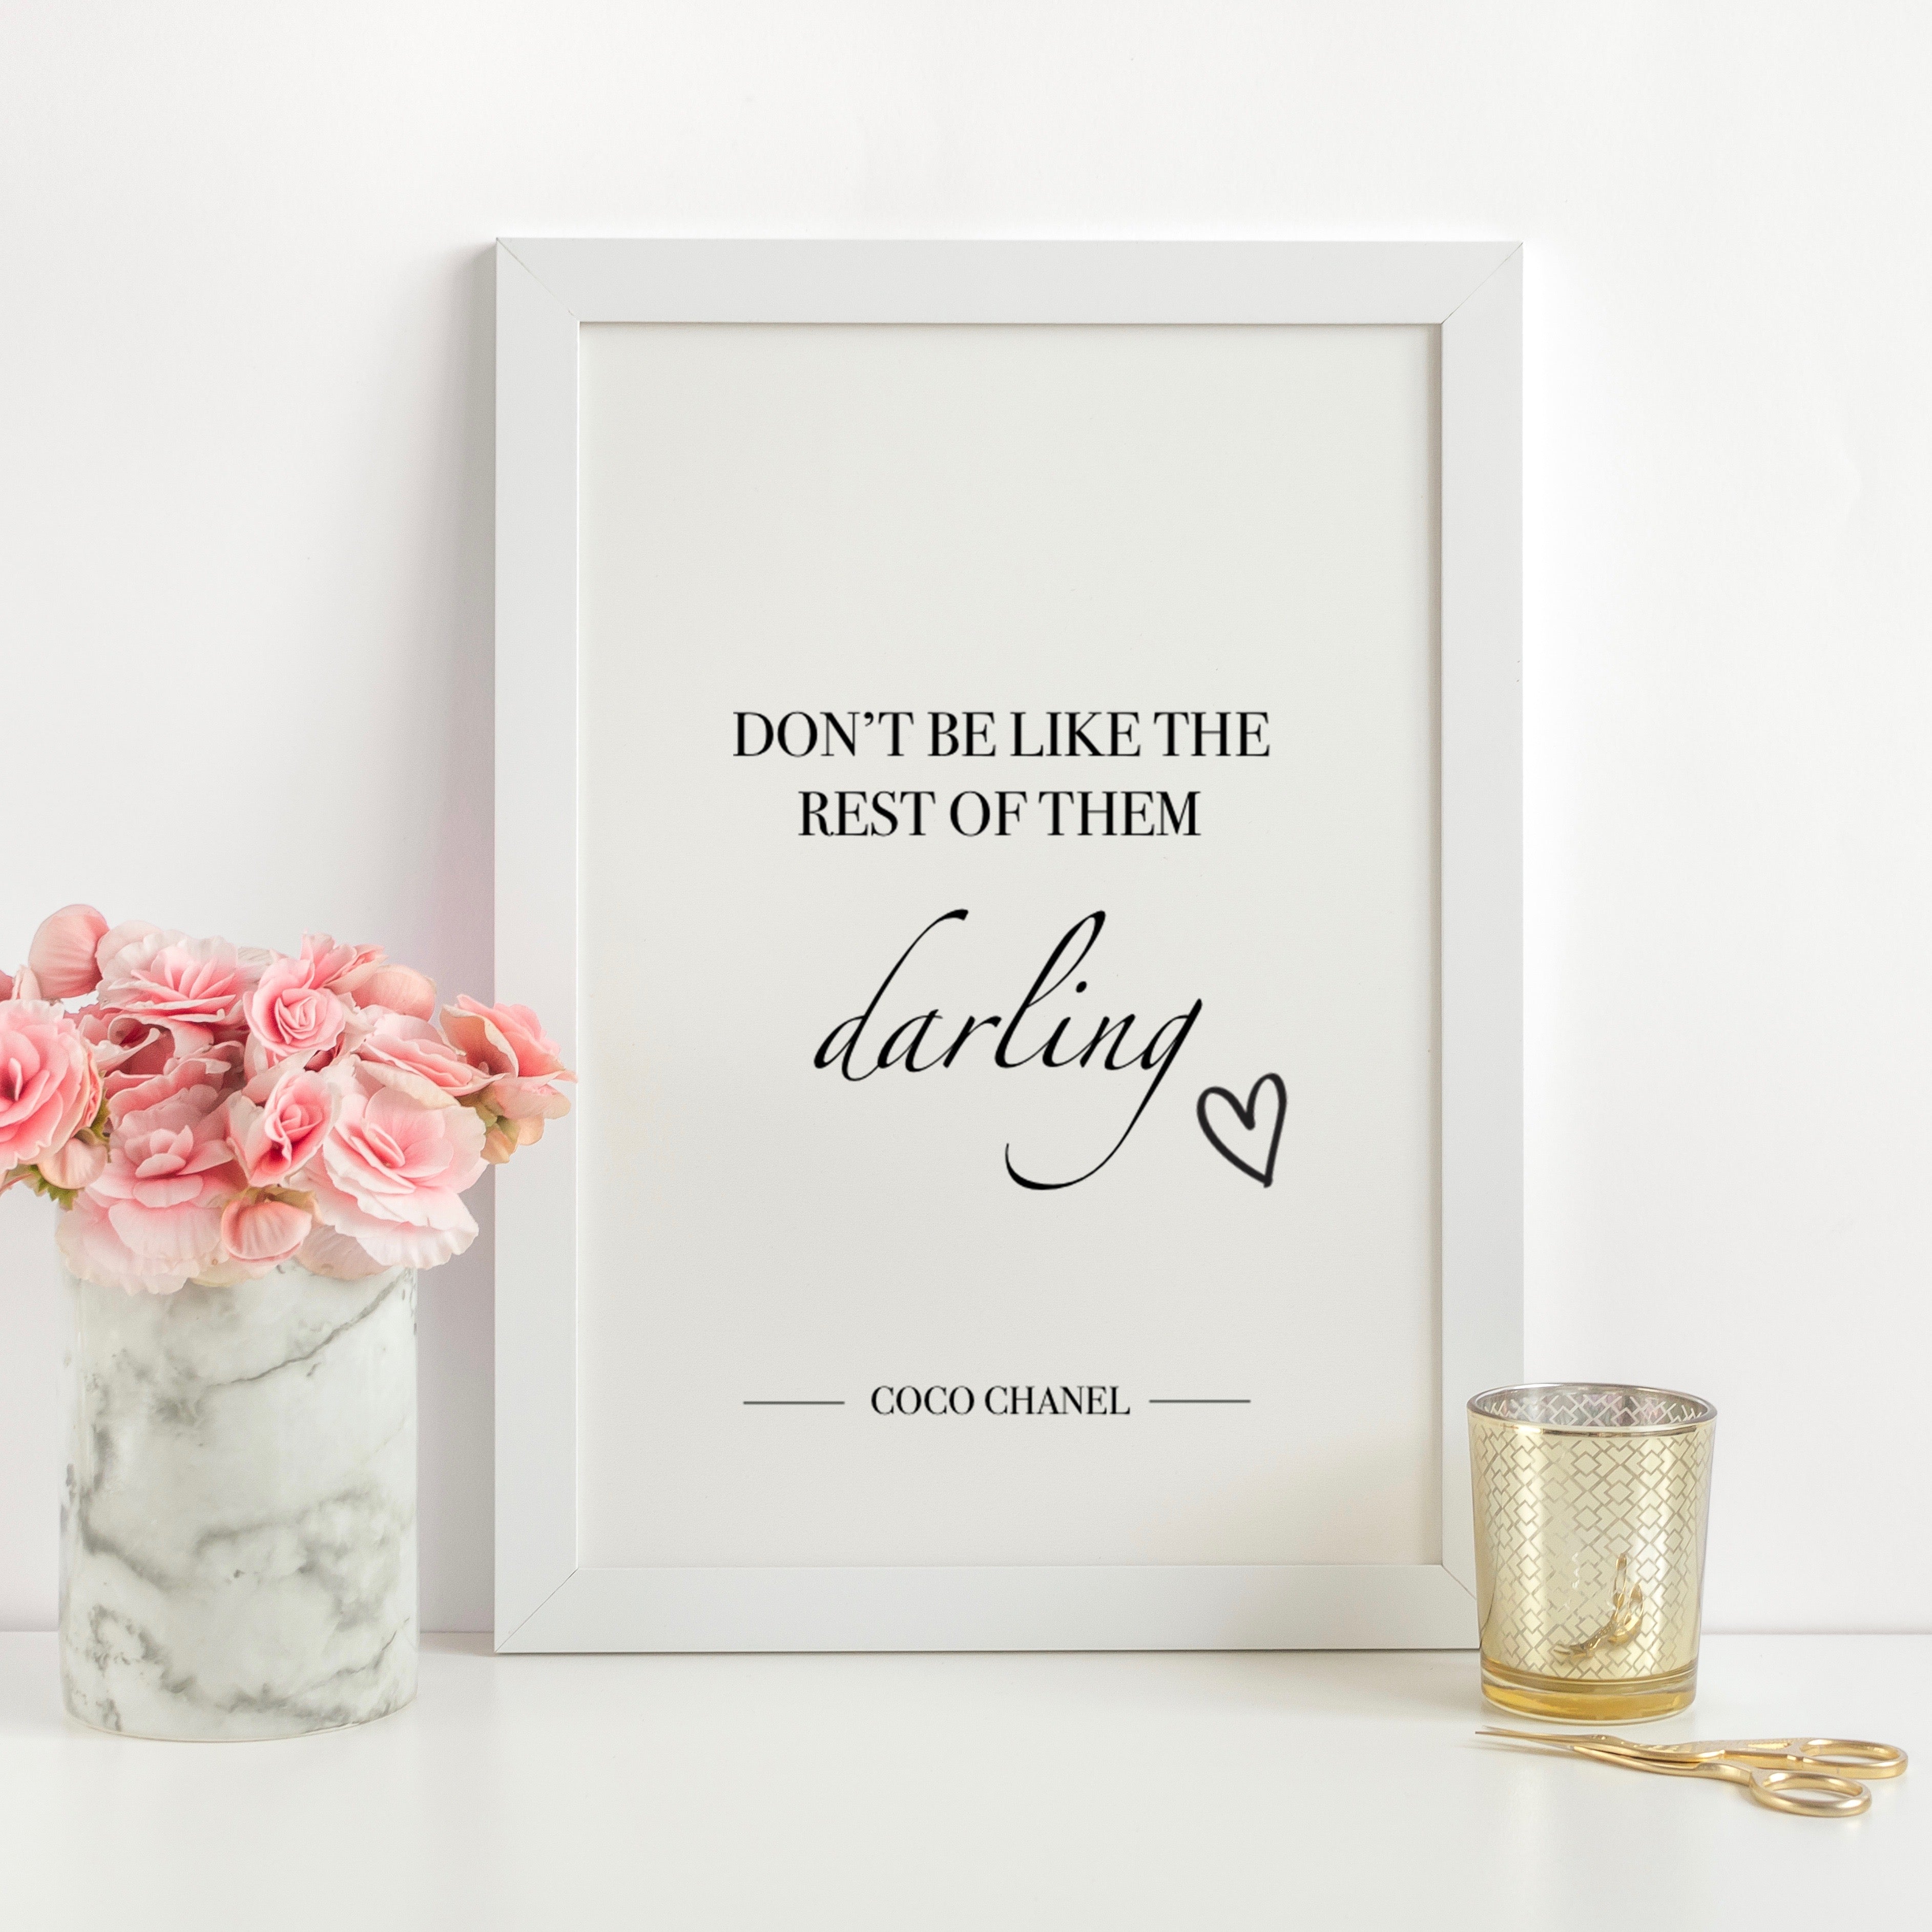 Don't Be Like the Rest of Them Darling - CoCo Chanel Quote A4